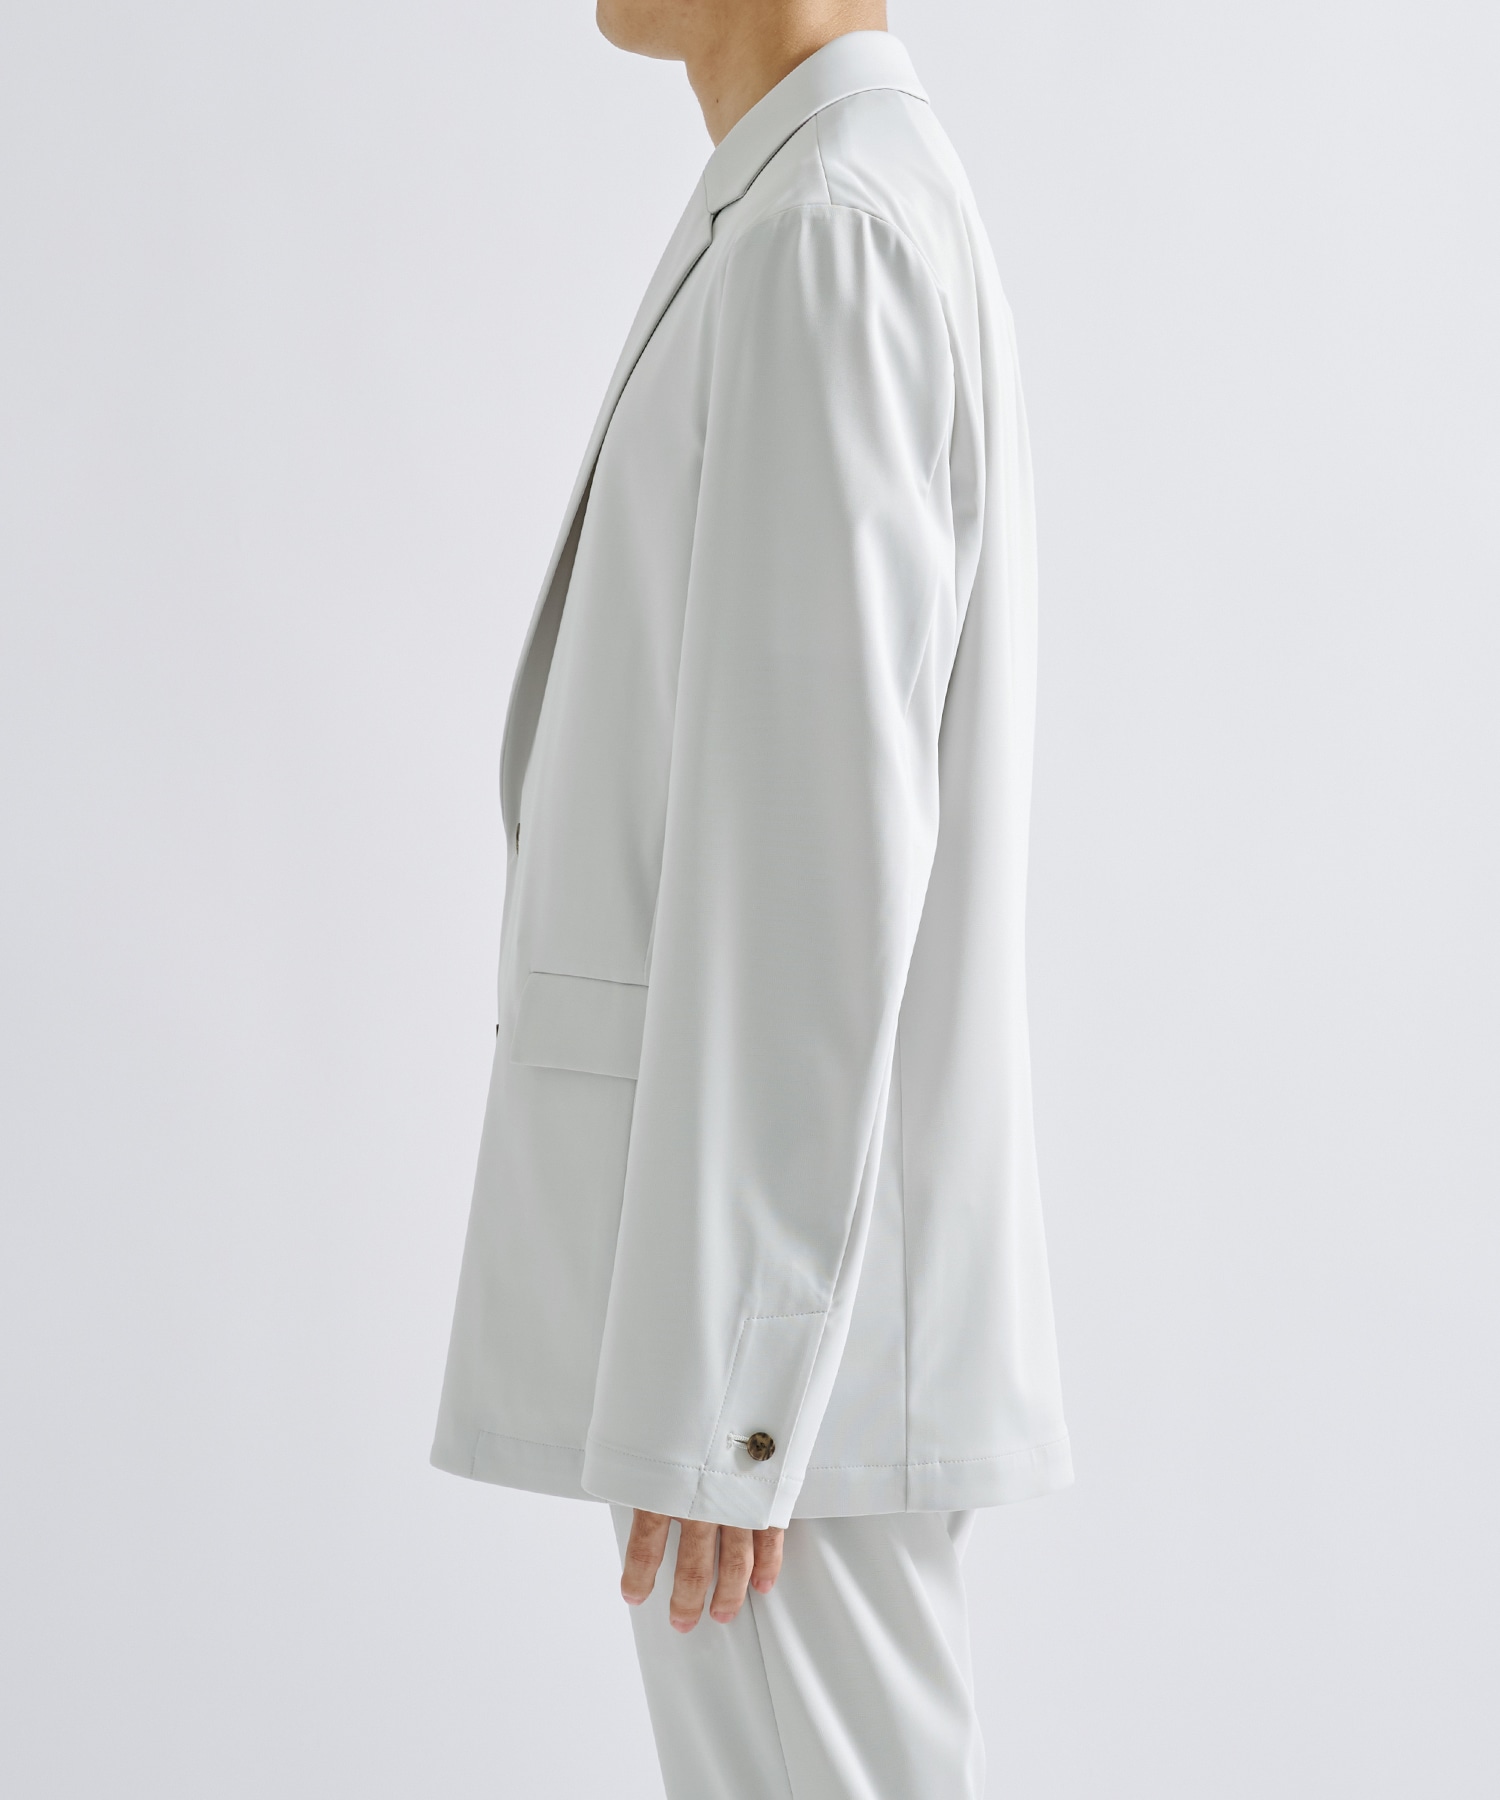 Ultra Right Washable High Function Jersey Shape Jacket THE TOKYO